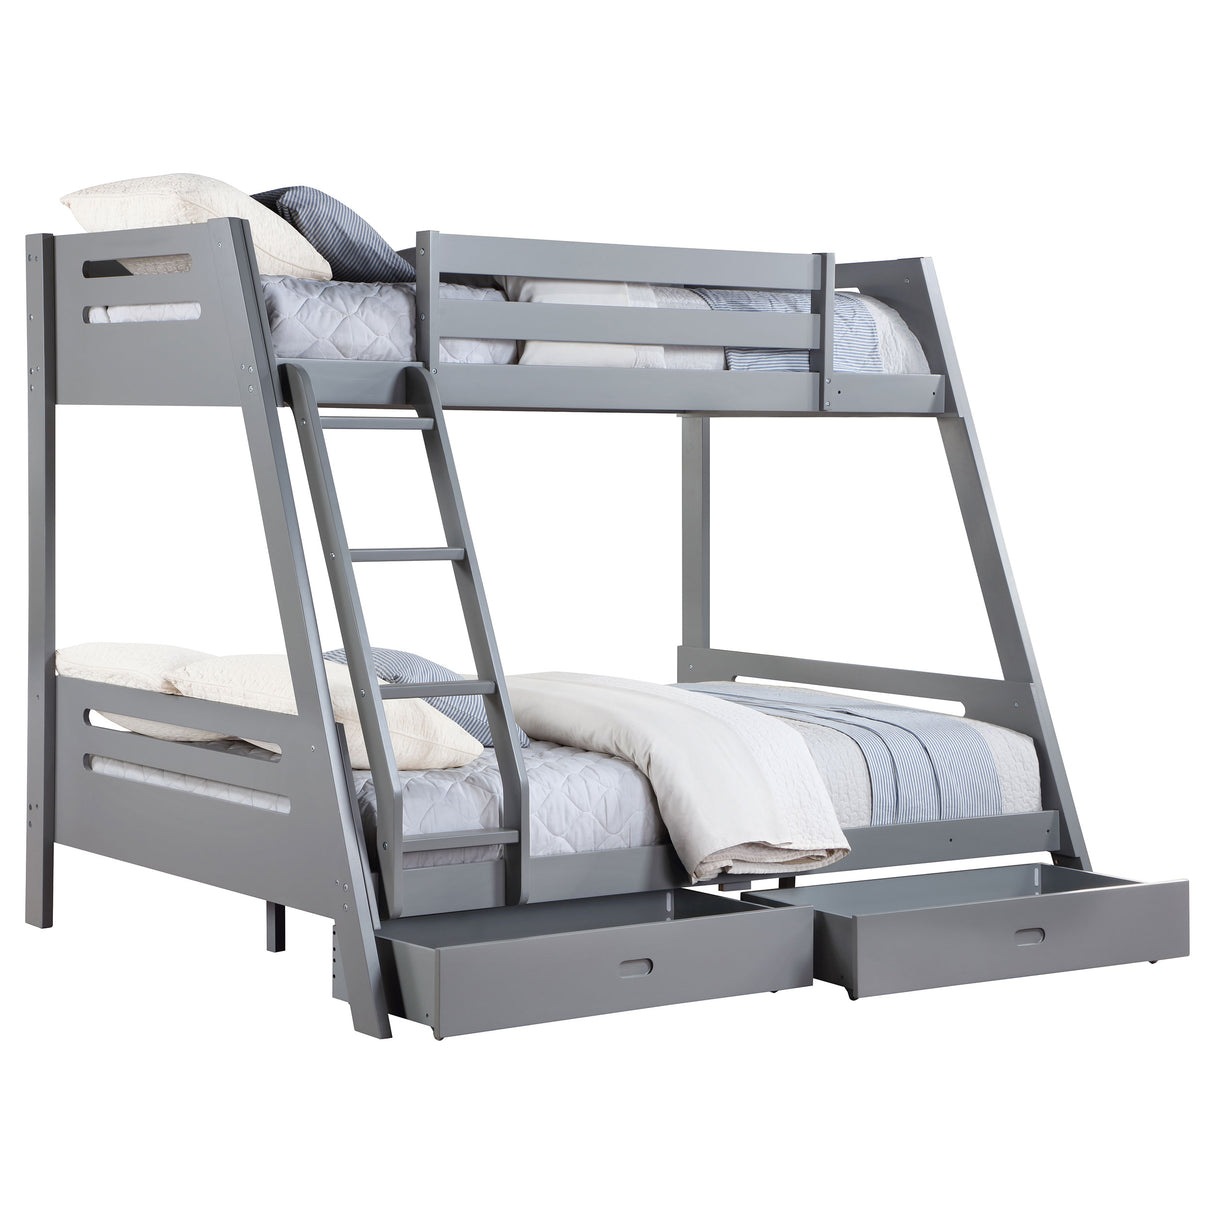 Twin / Full Bunk Bed - Trisha Wood Twin Over Full Bunk Bed with Storage Drawers Grey